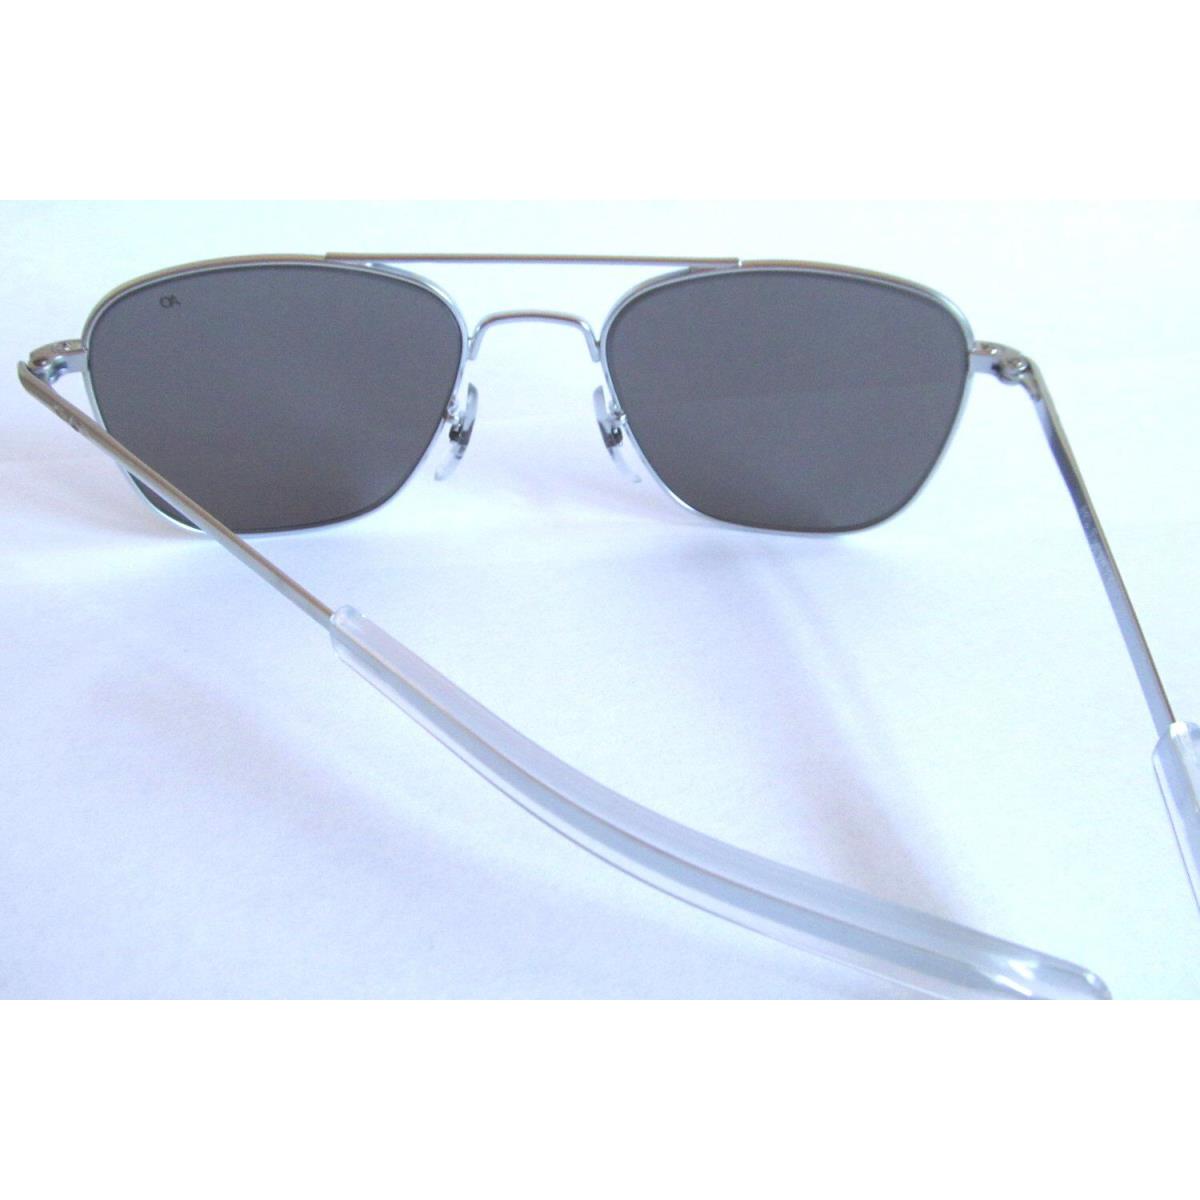 10701 General Government Air Force Pilot Sunglasses by American Optics